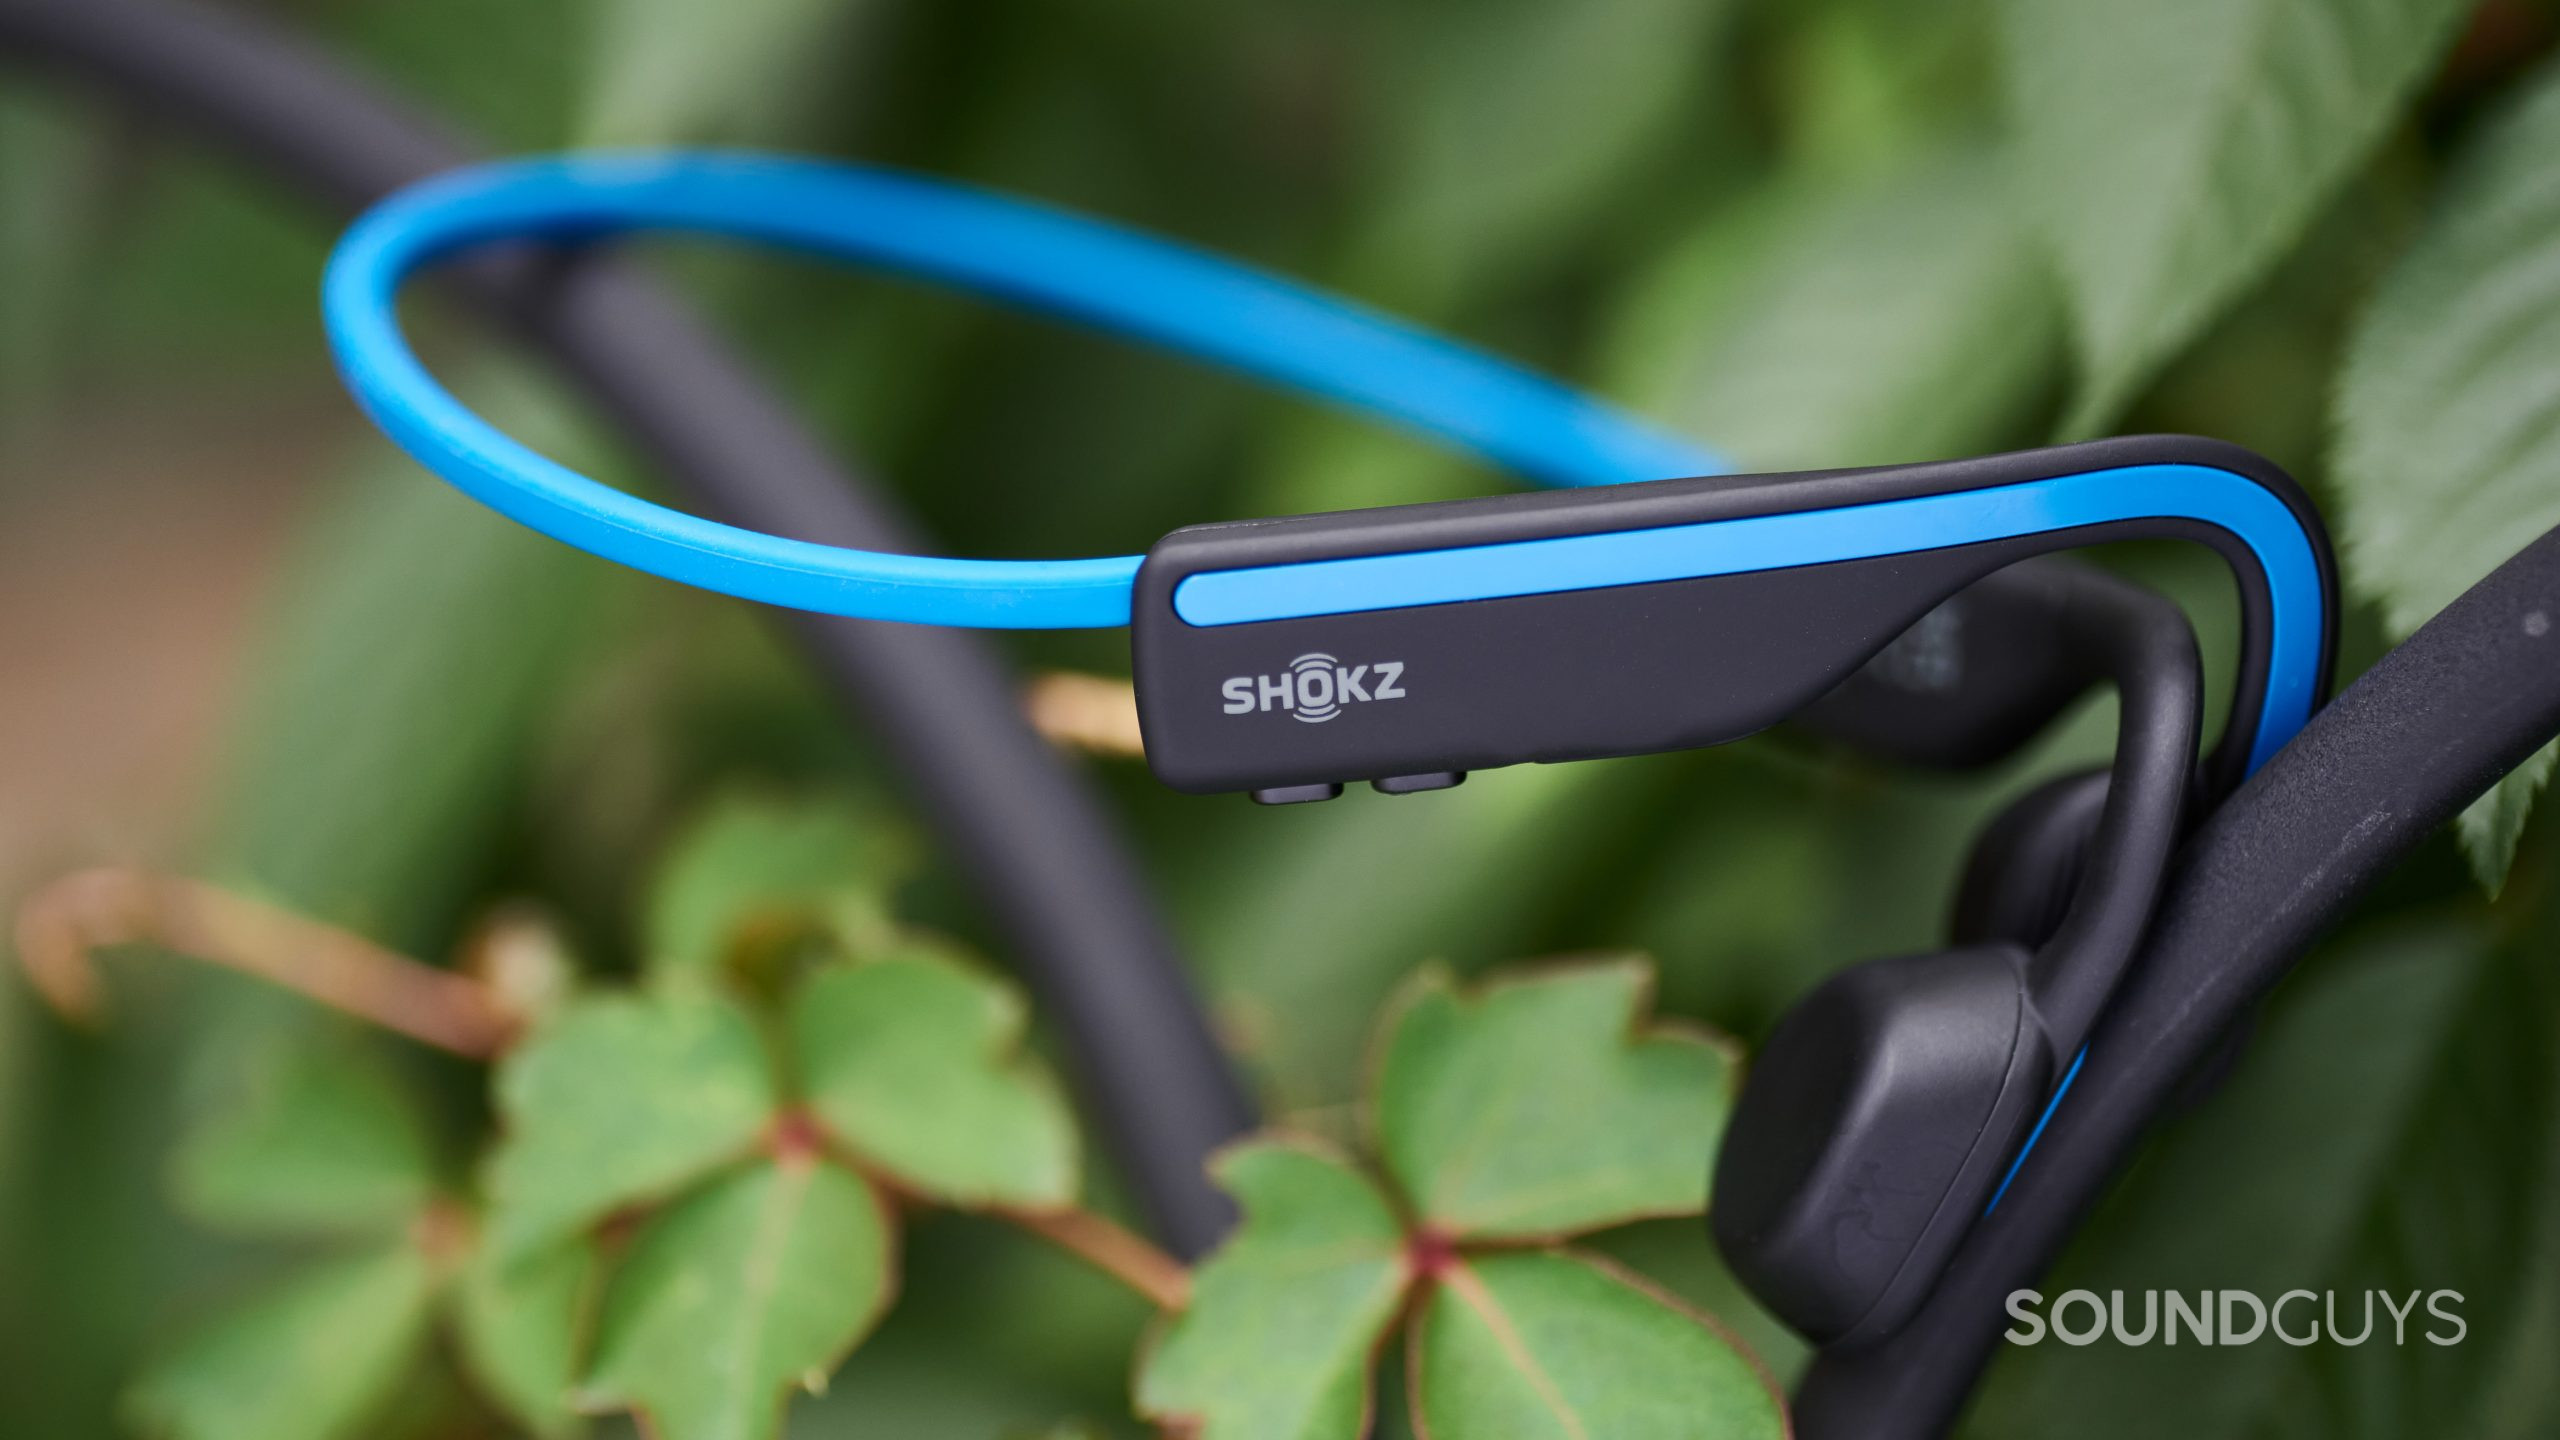 The Shokz OpenMove bone conduction headphones resting against some small leaves.